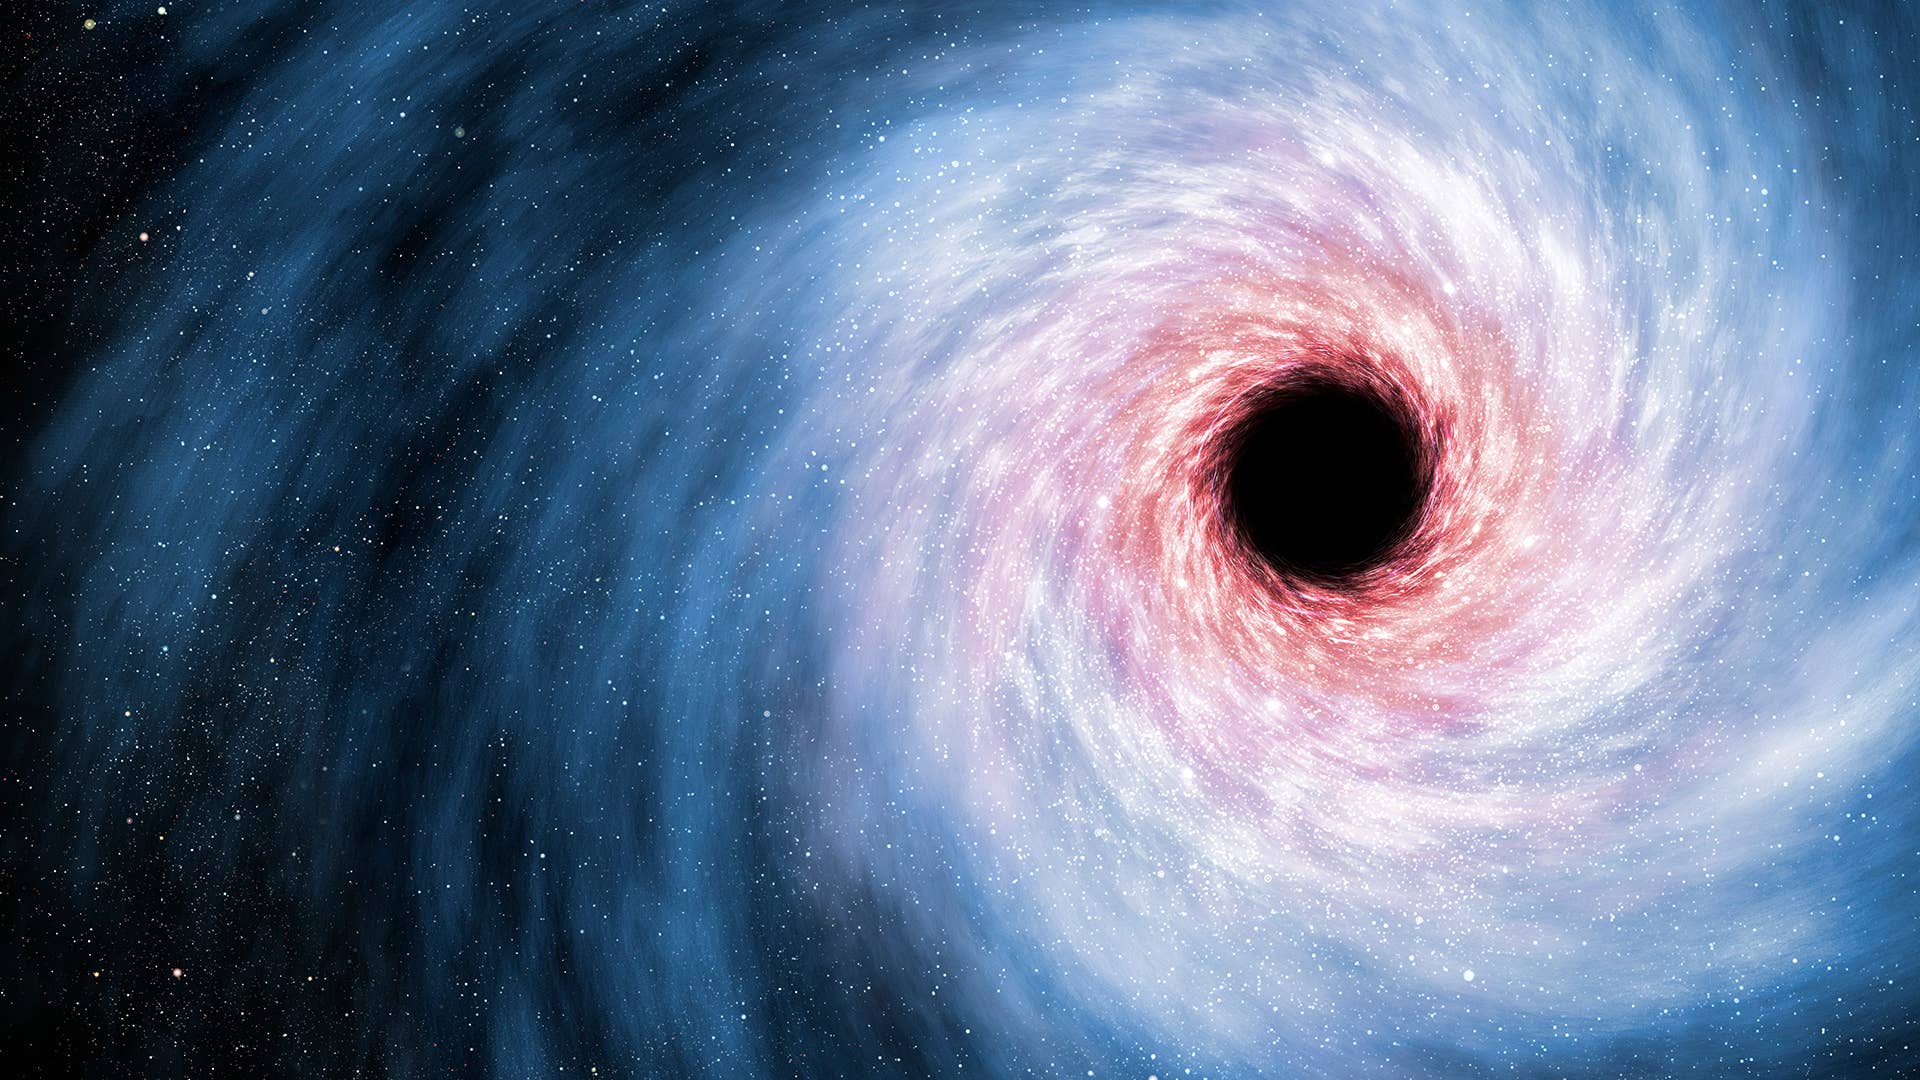 An artist's illustration of a black hole per the Science Photo Library.